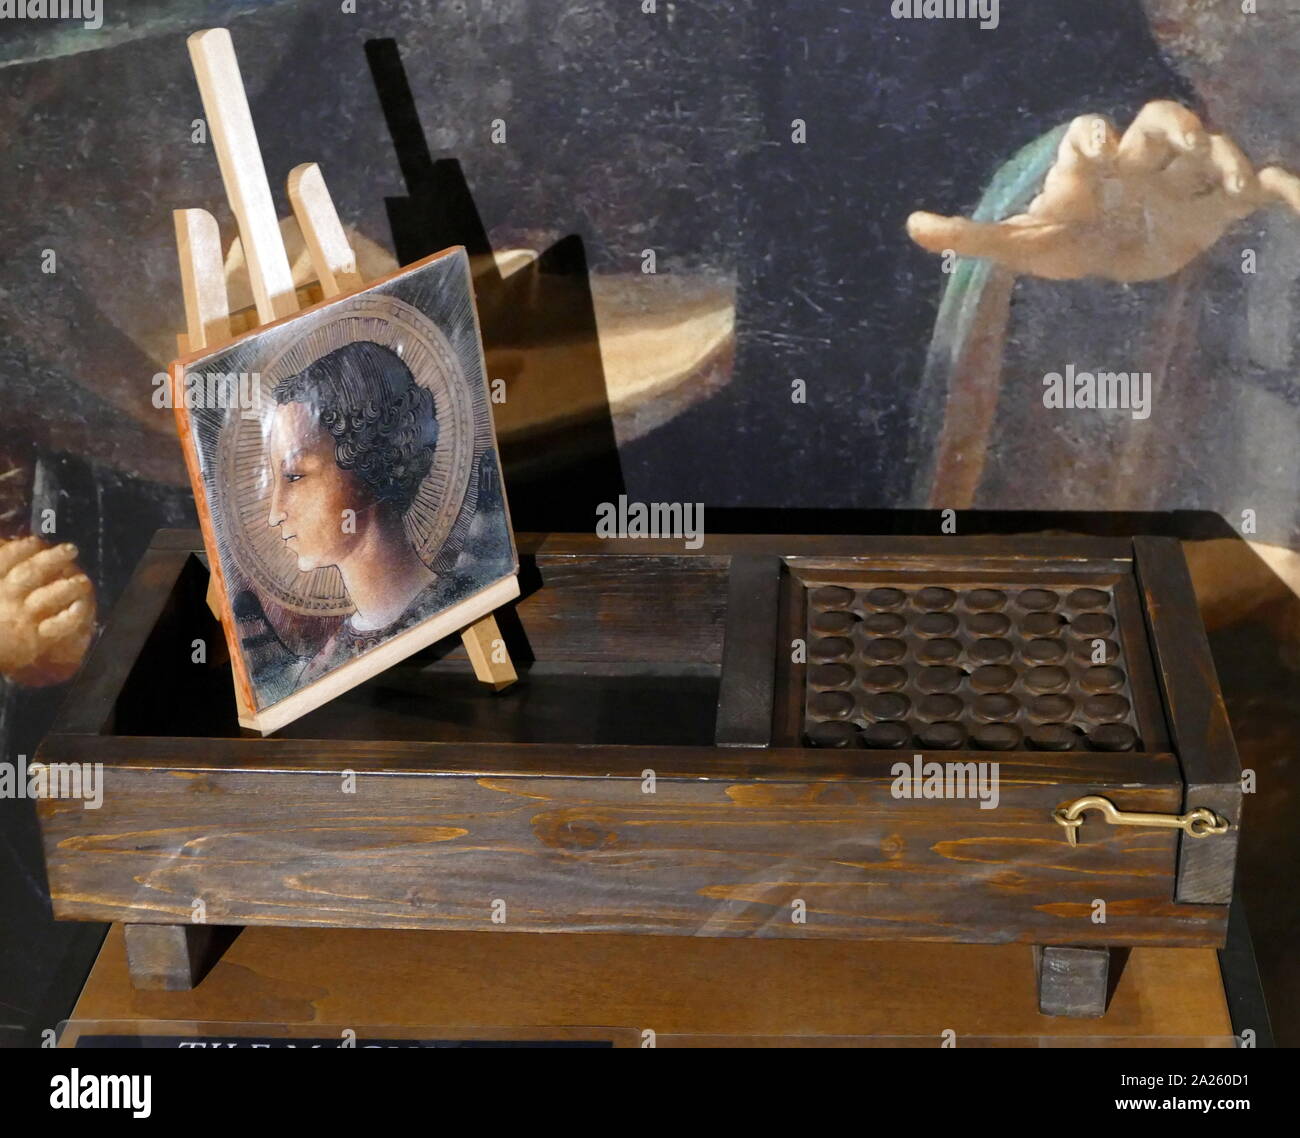 Model of from a drawing by Leonardo da Vinci on the method used to form tiles, with a wooden mould Stock Photo